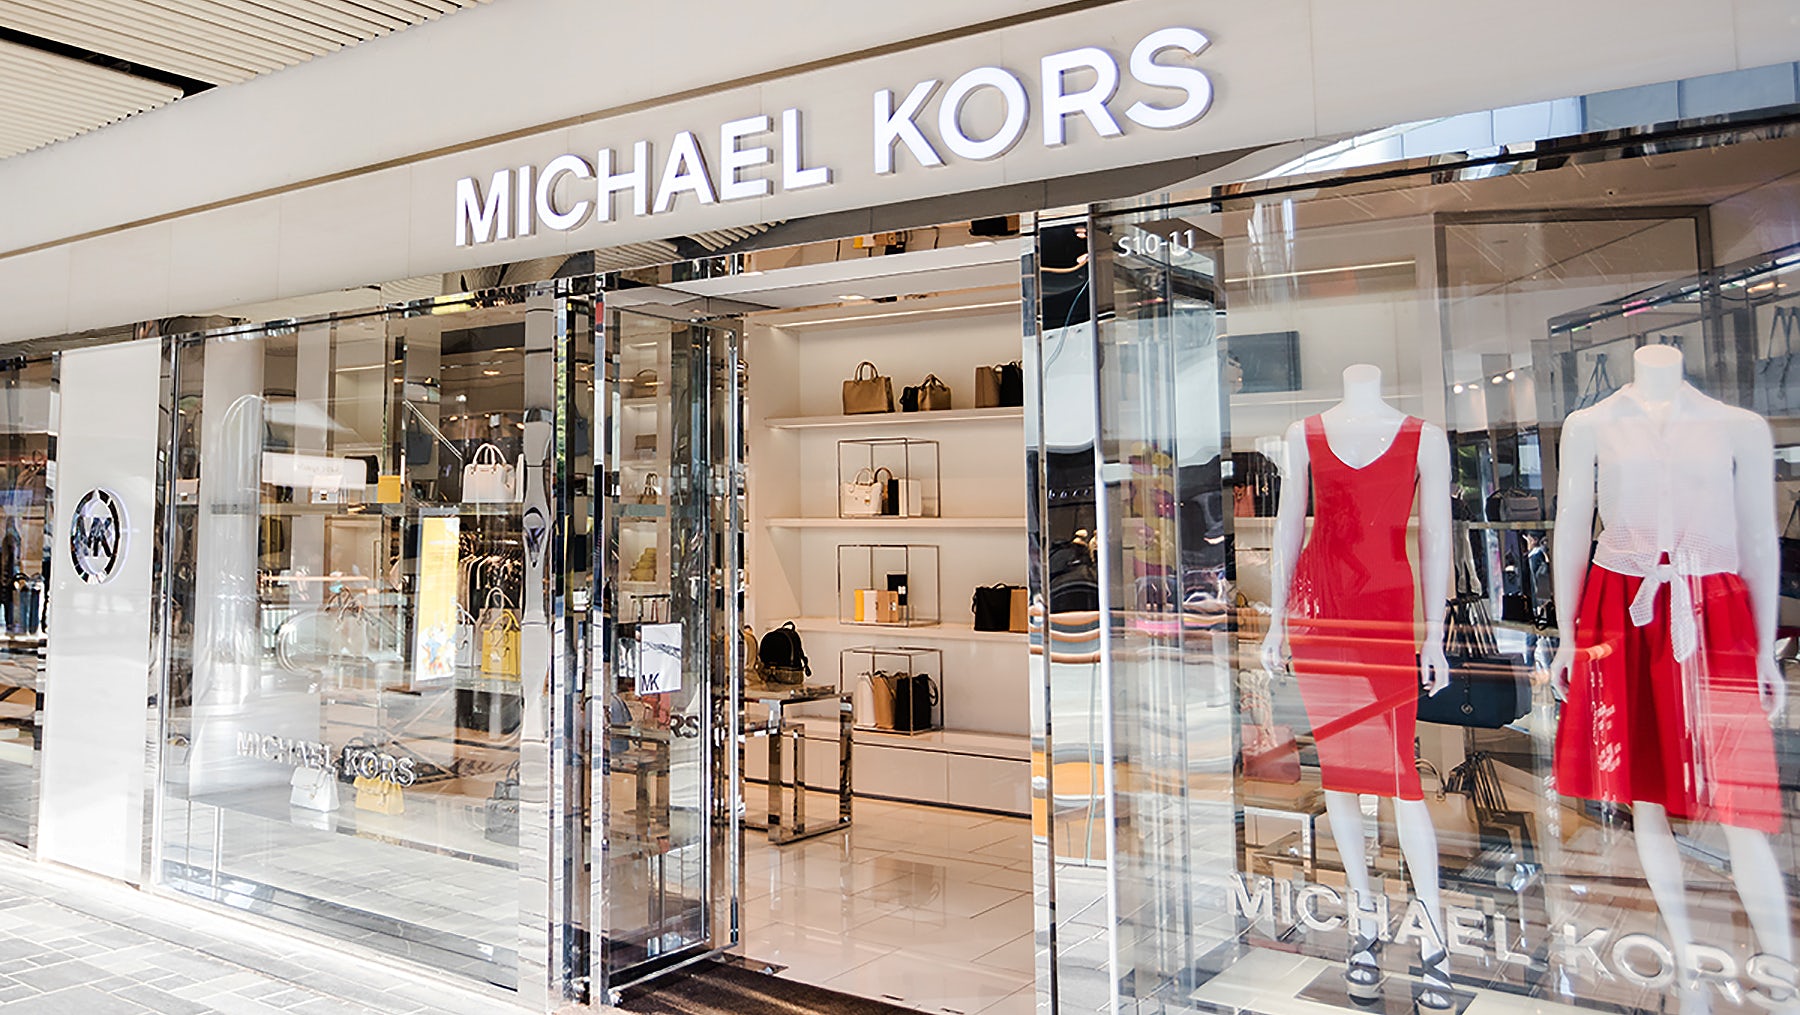 Michael Kors Hopes to Win Customers with Experiences | BoF